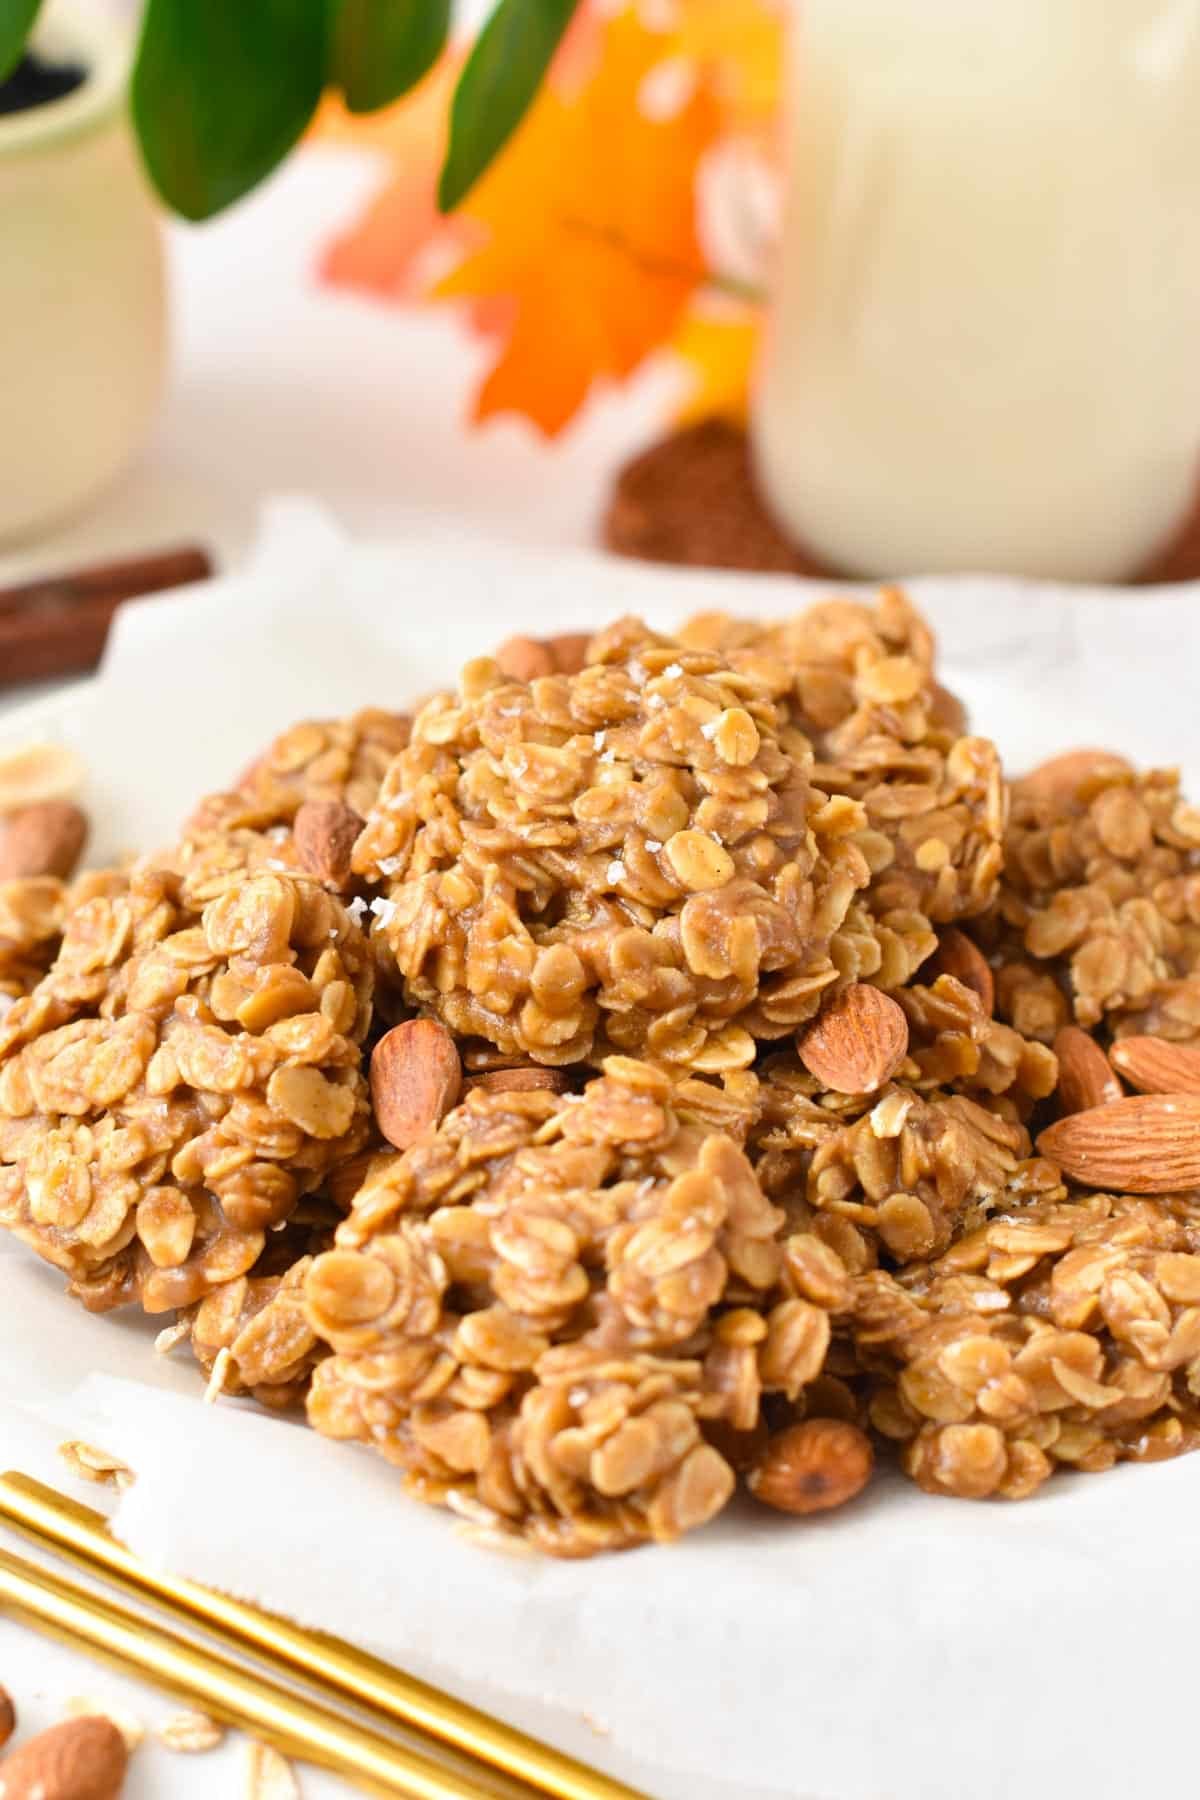 A plate filled with a stack of no-bake oatmeal almond butter cookies.
